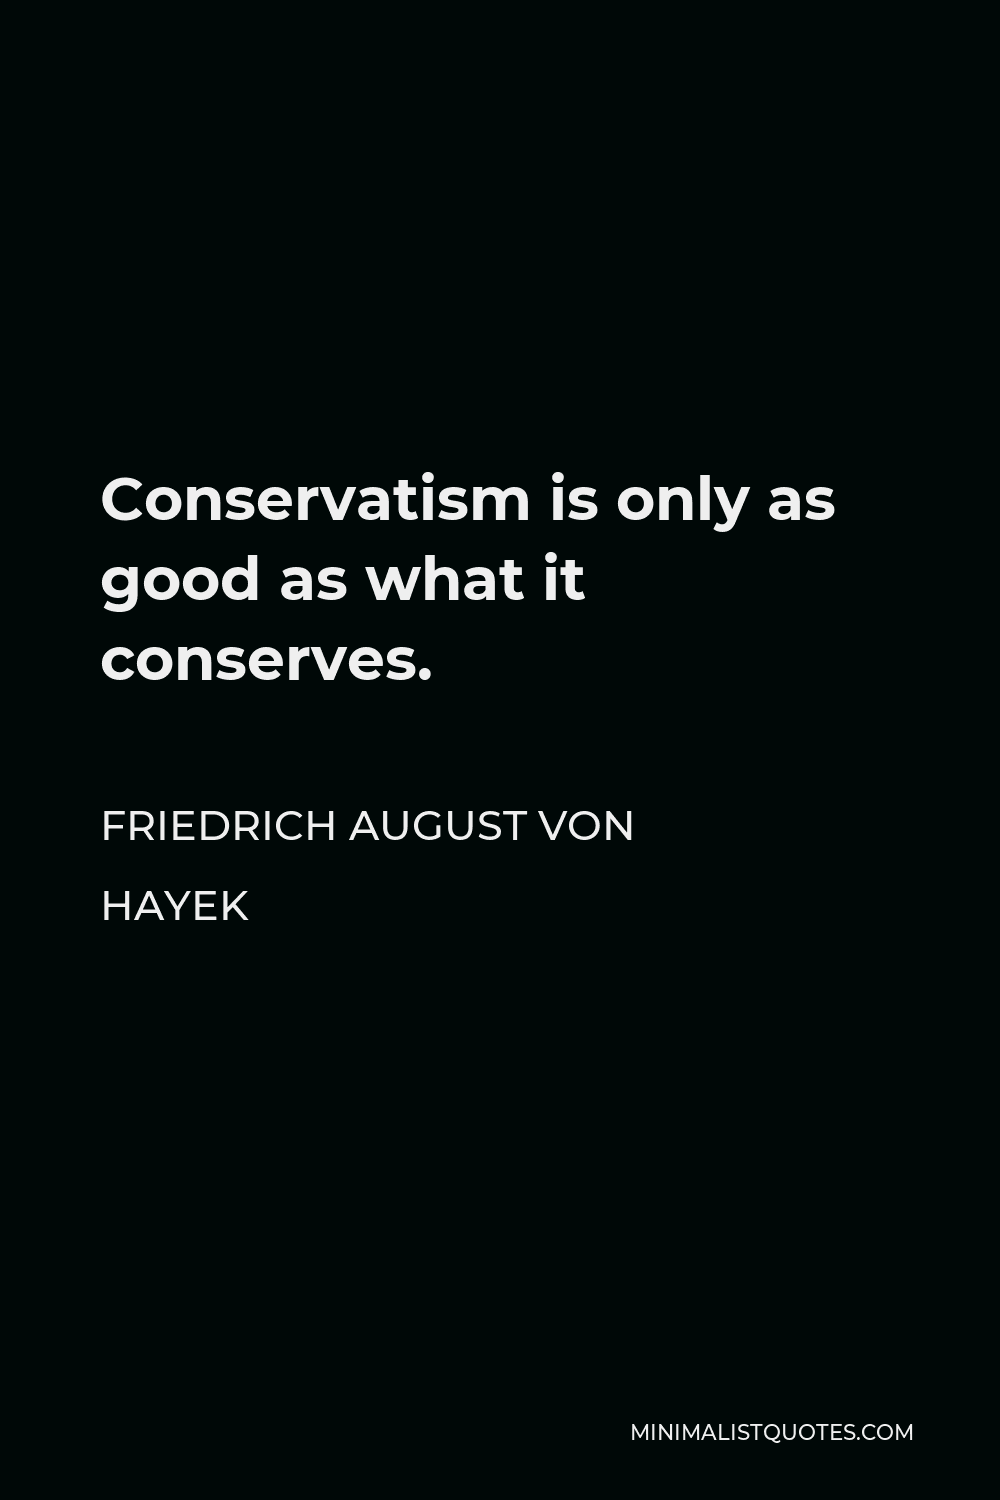 Friedrich August von Hayek Quote - Conservatism is only as good as what it conserves.